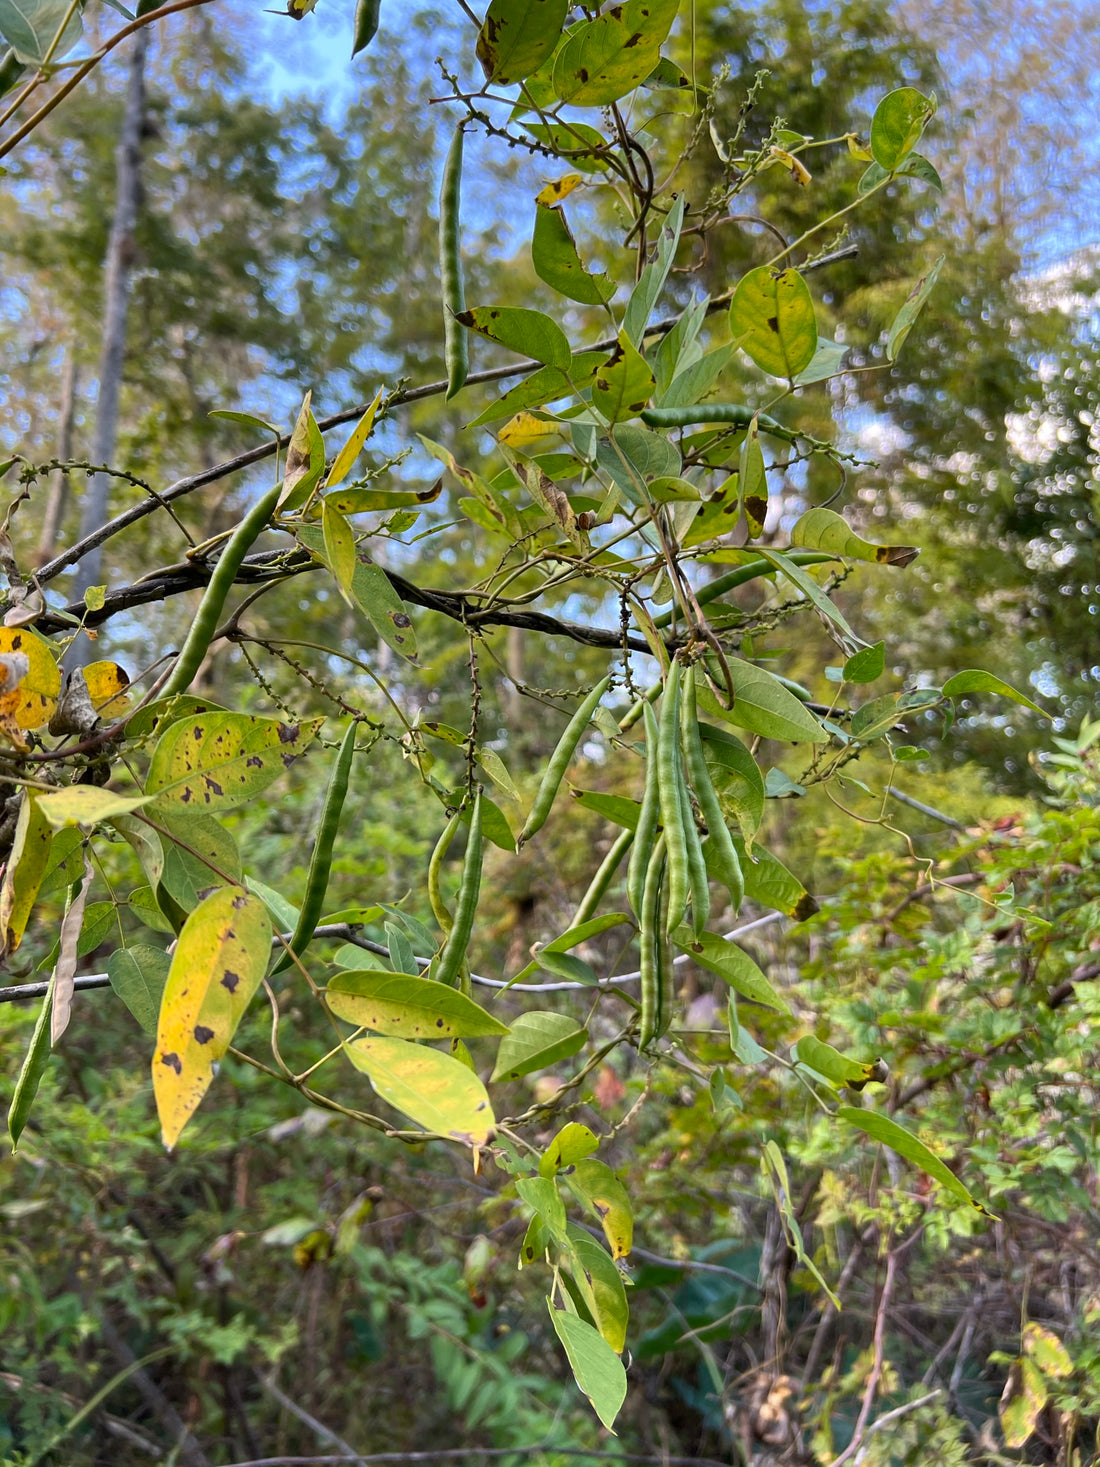 American Groundnut Vine with Pods